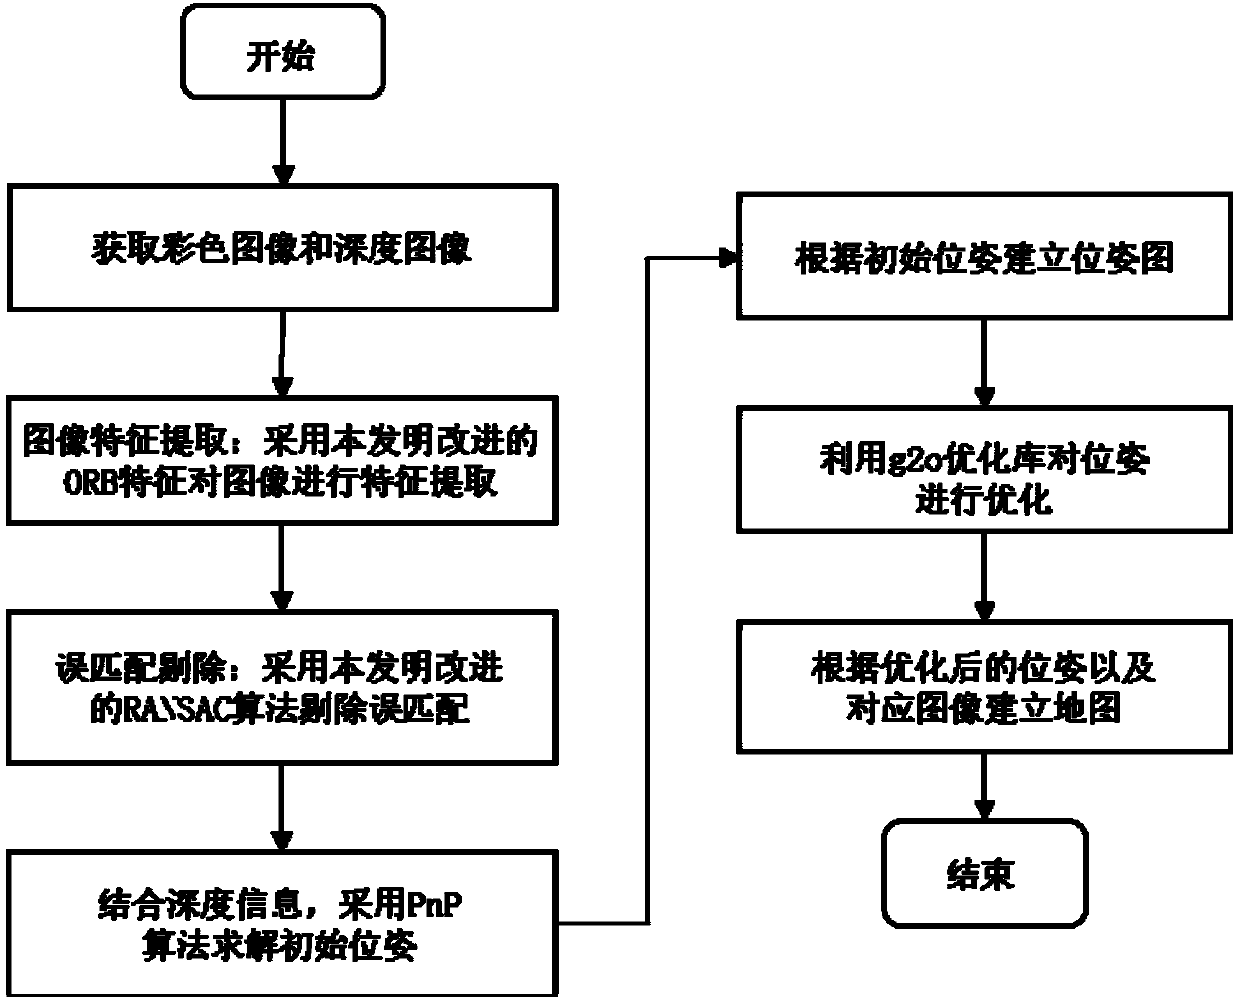 Synchronous localization and mapping method based on improved image matching strategy